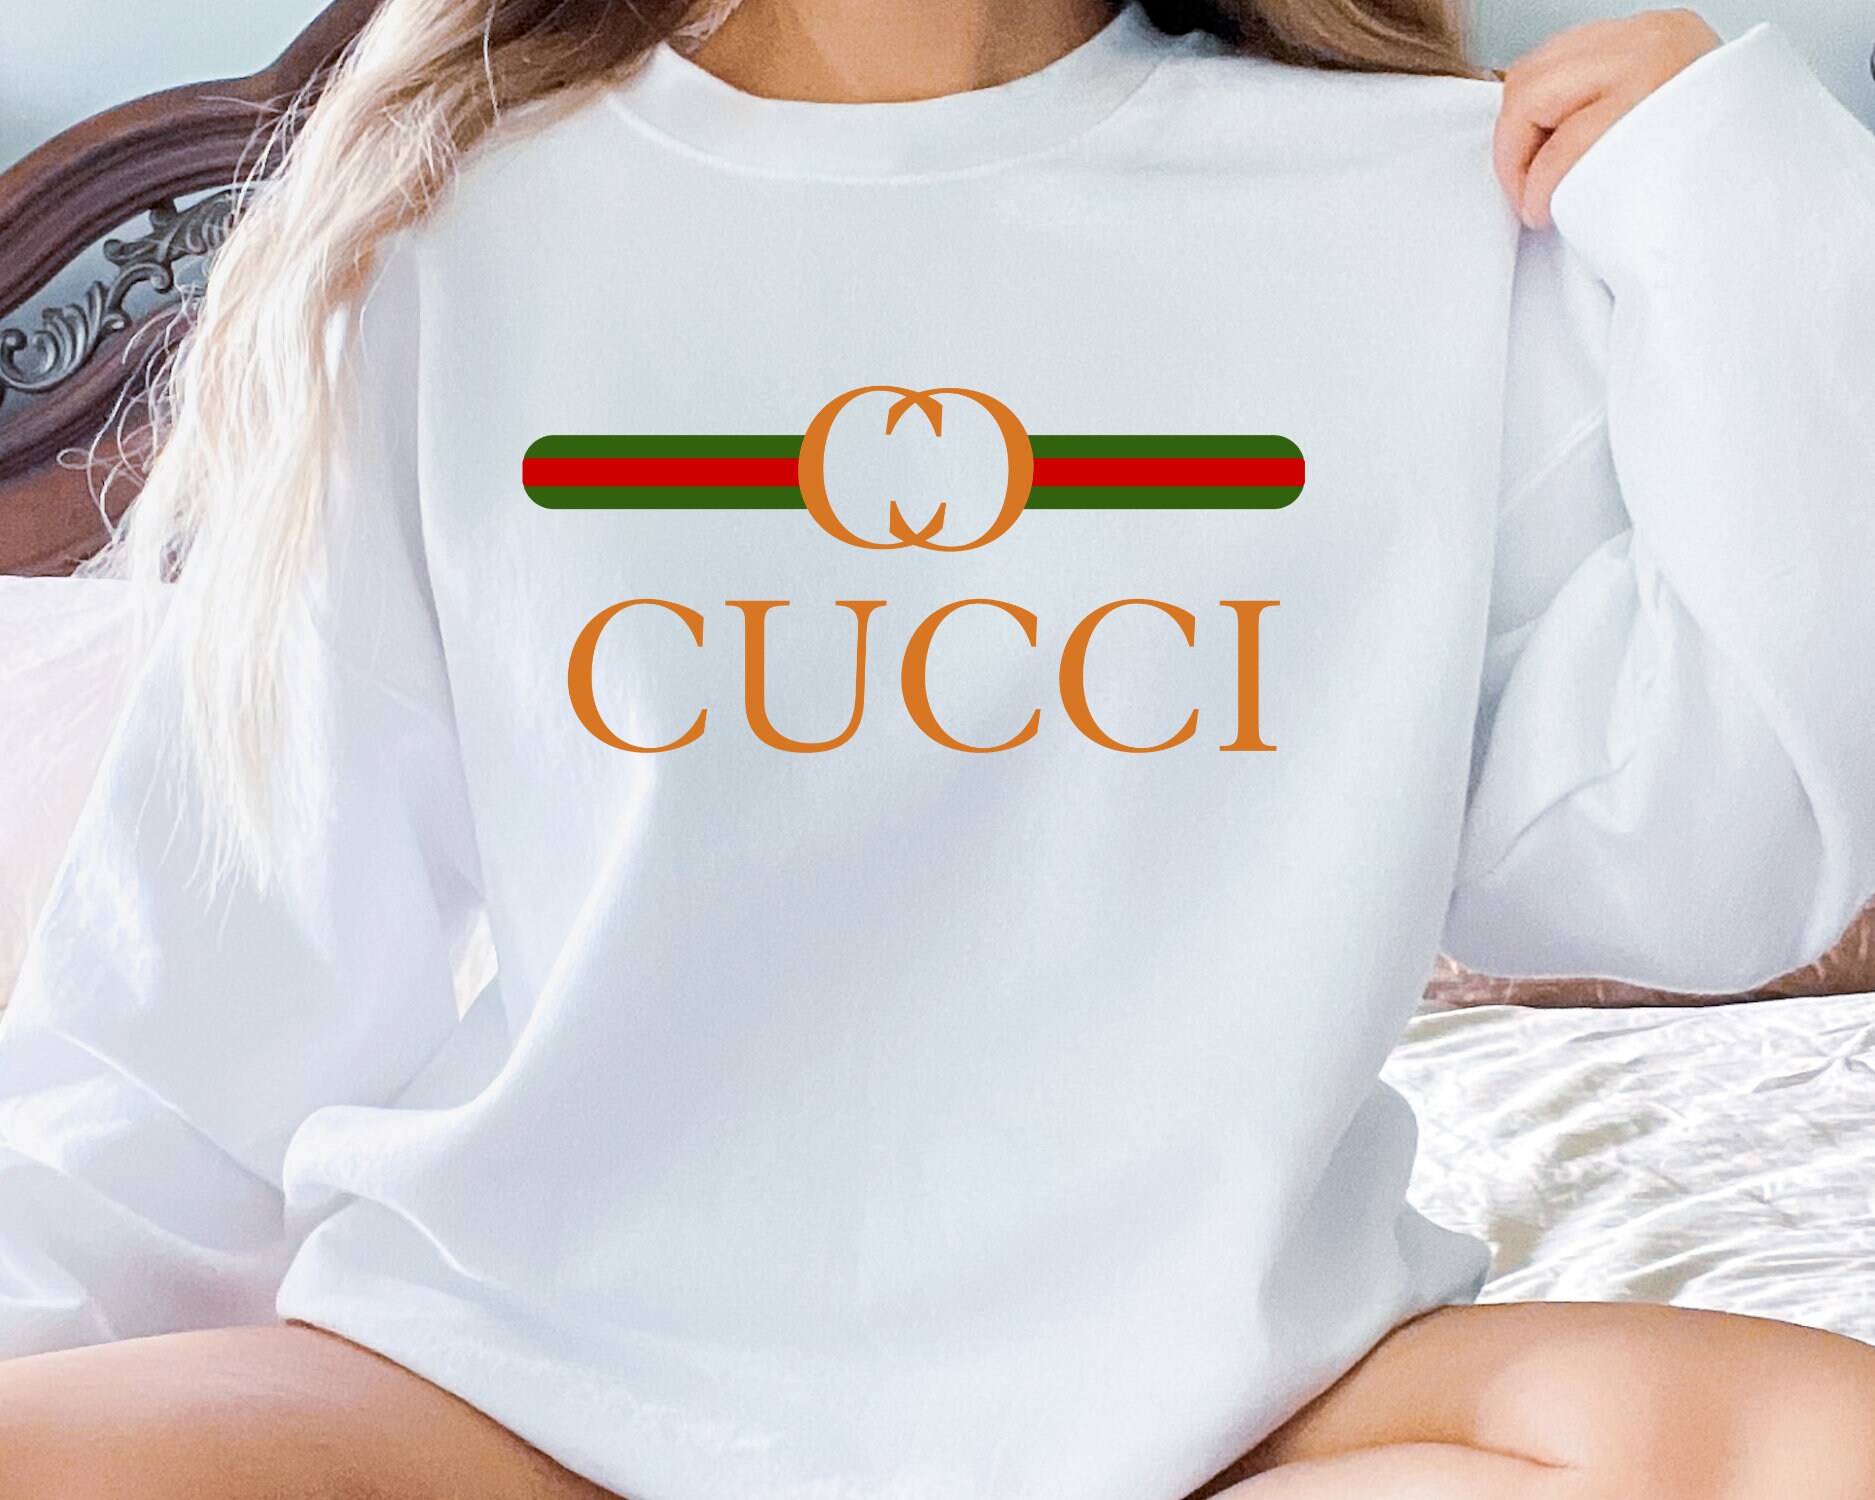 Gucci T-Shirts and Exotic Locations: A Sexy Adventure